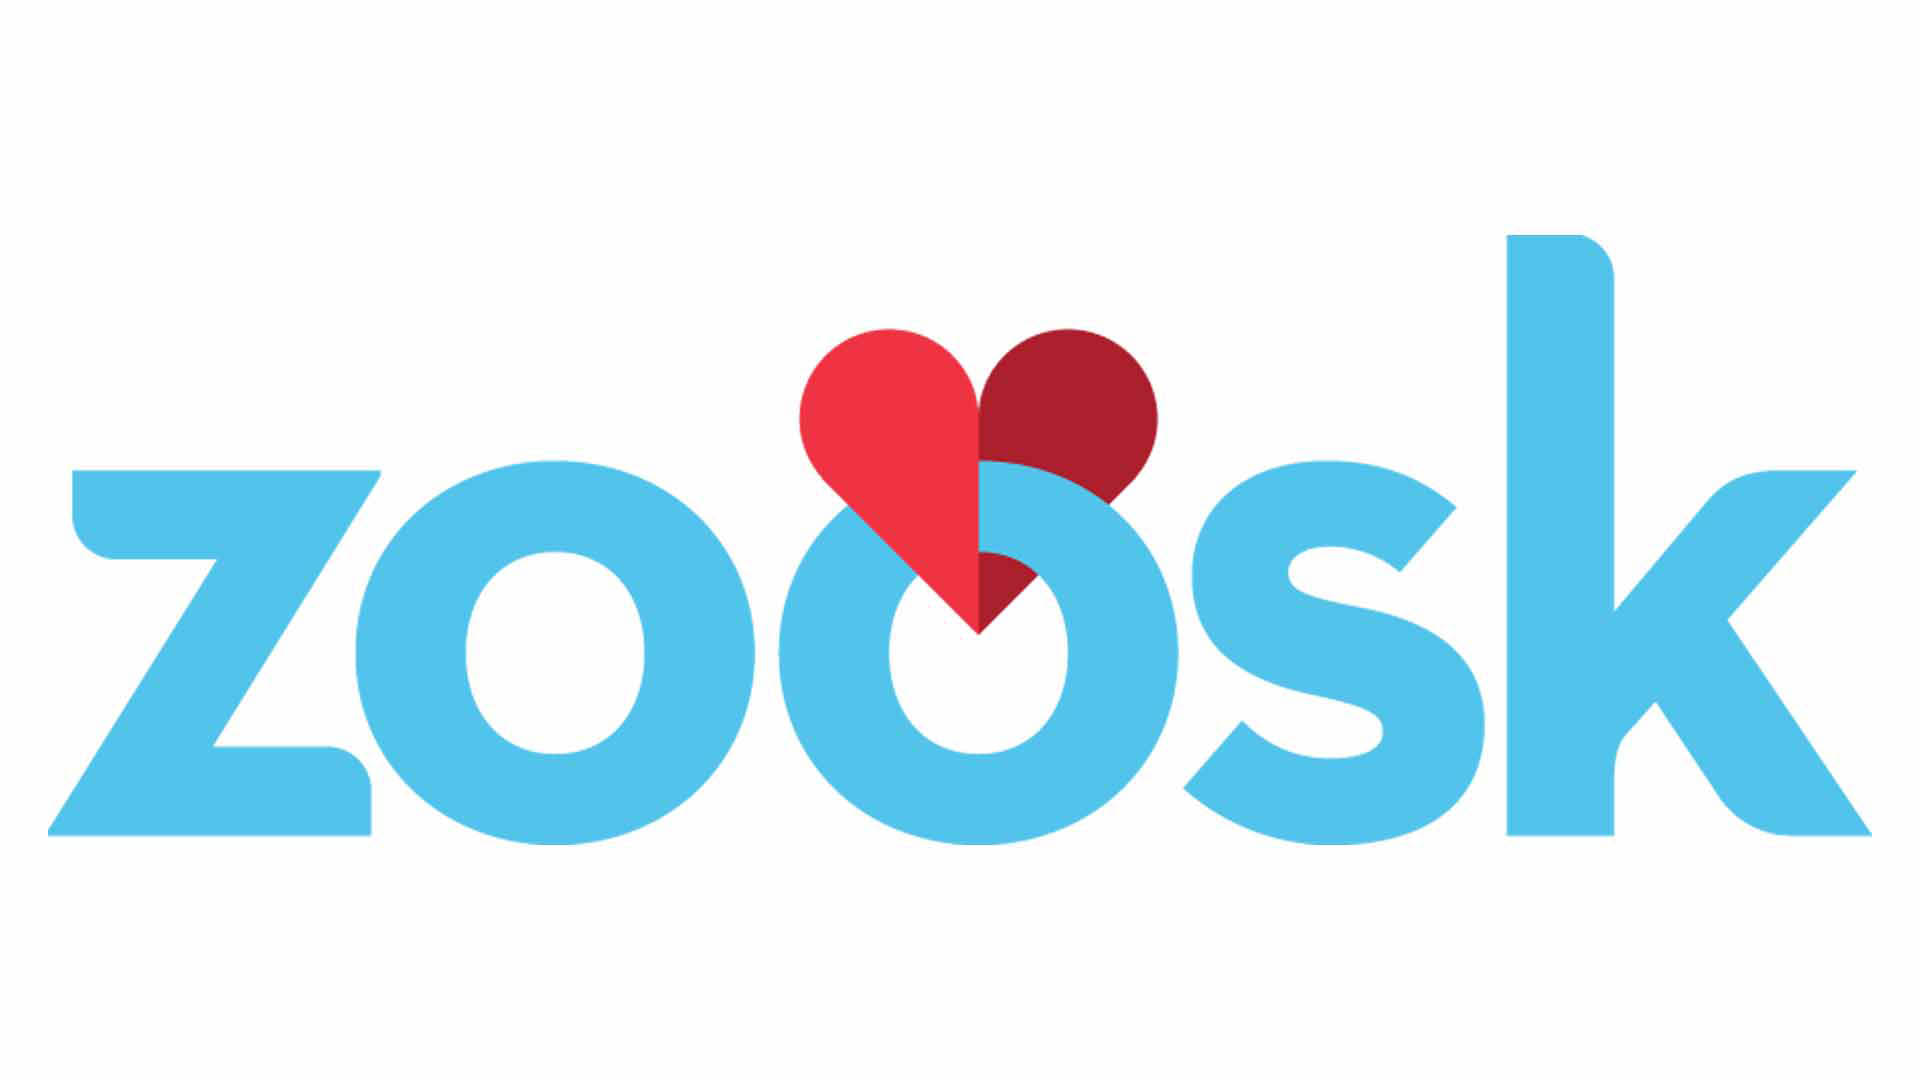 Search zoosk without joining.